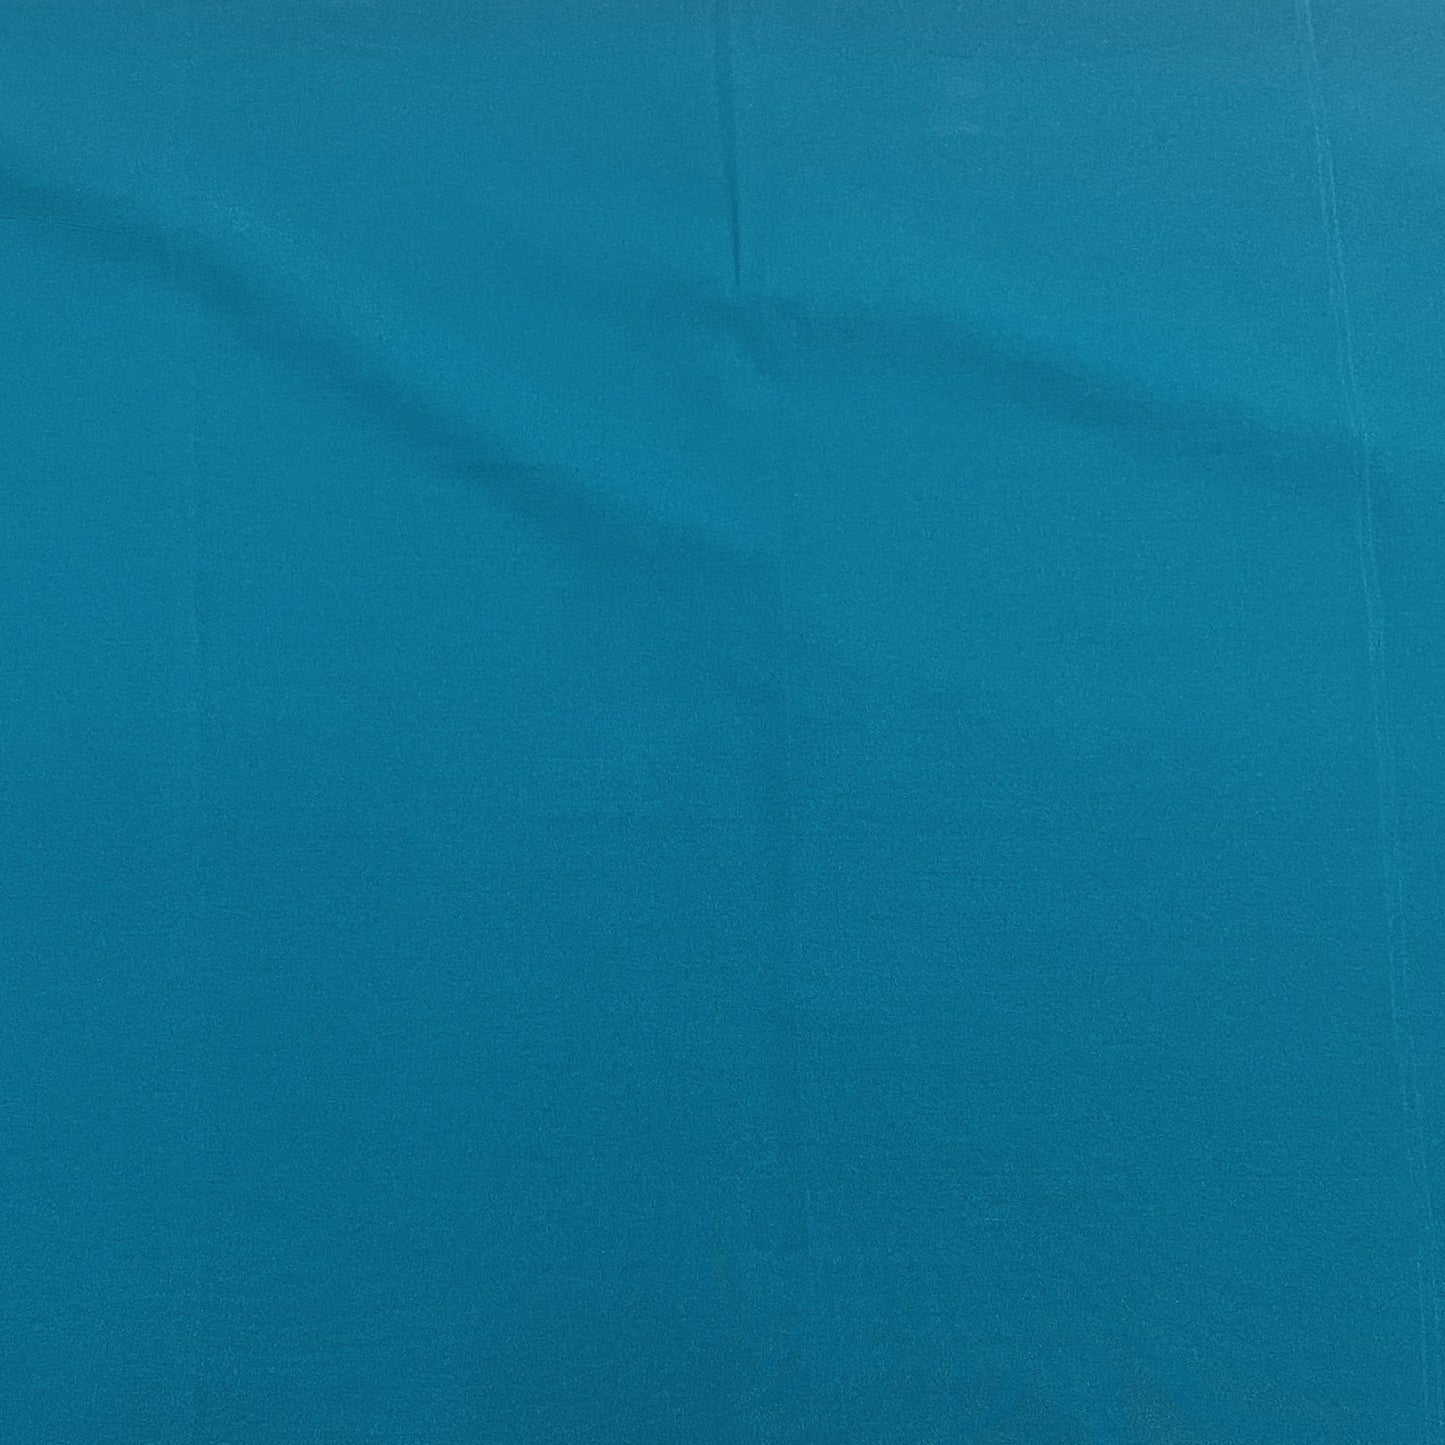 Exclusive Teal Green Solid Malai Crepe Fabric